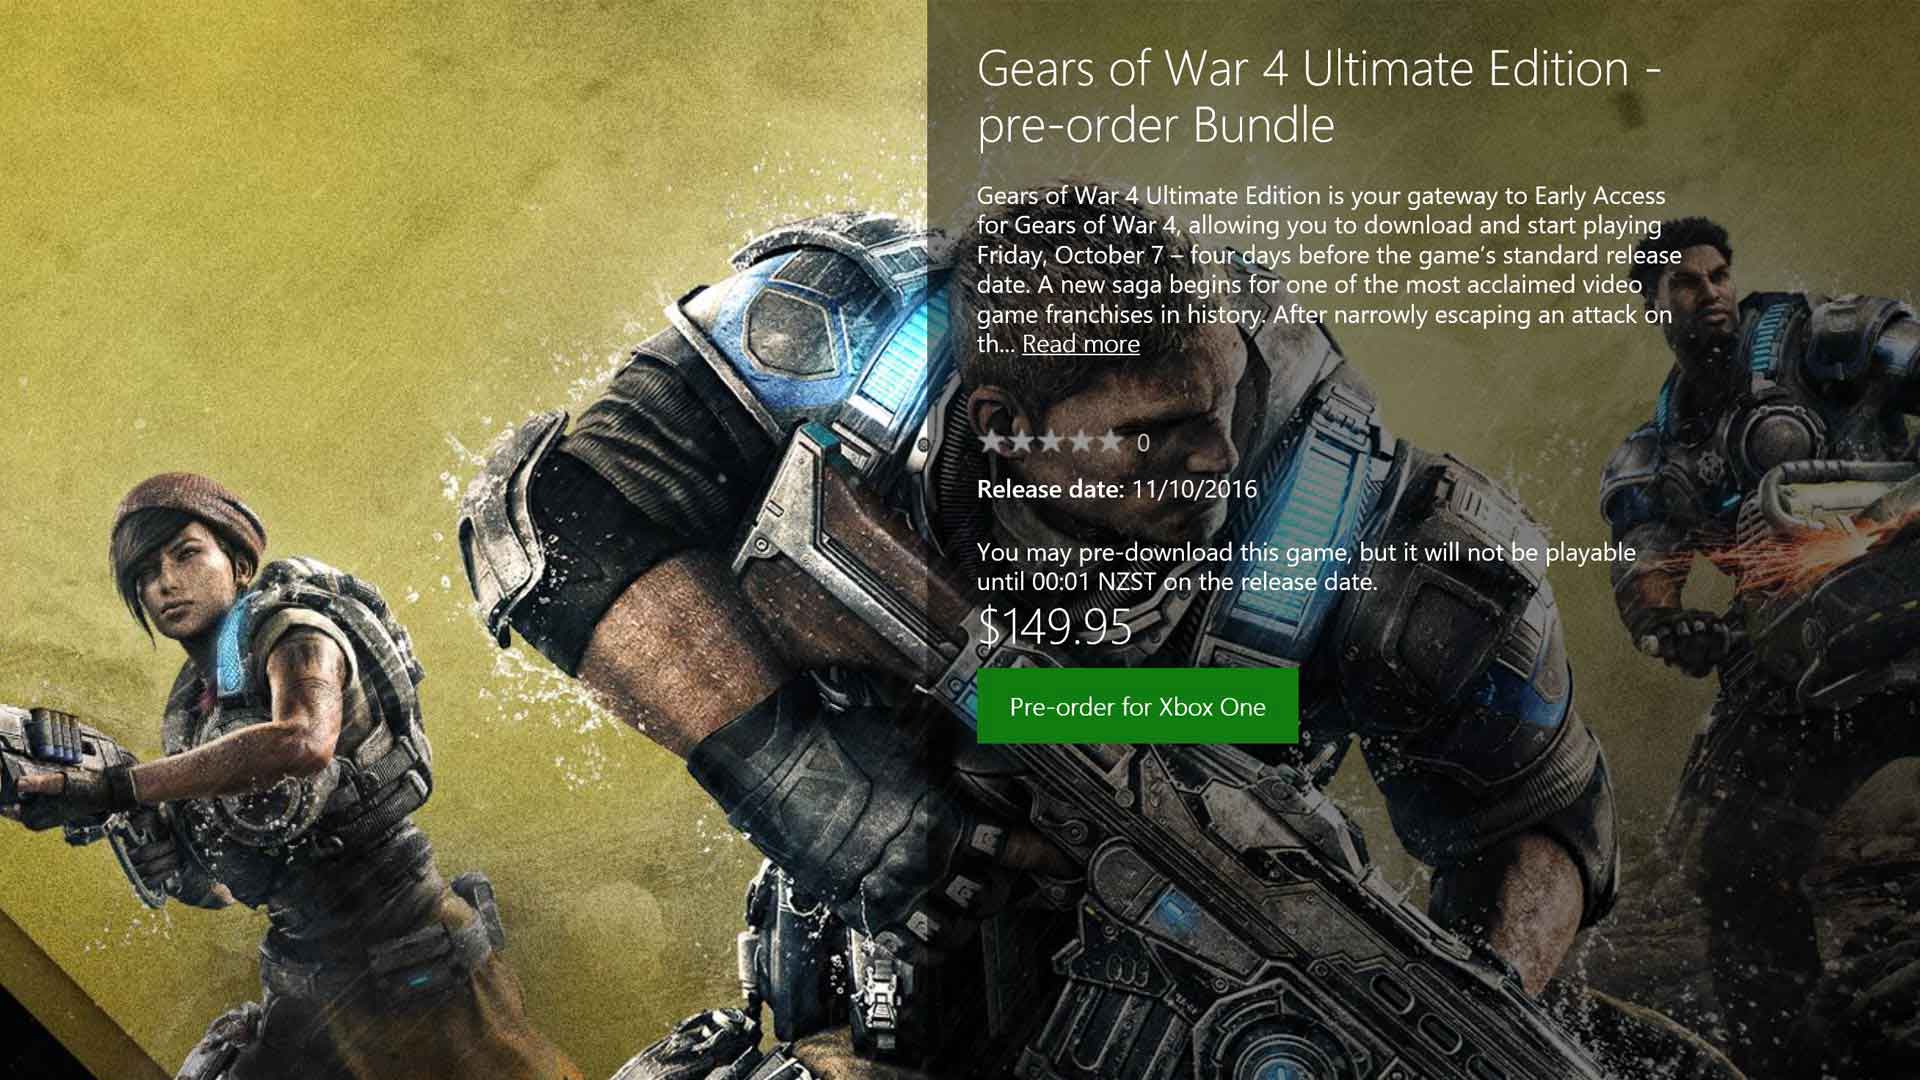 Gears of War 4: Ultimate Edition Announced